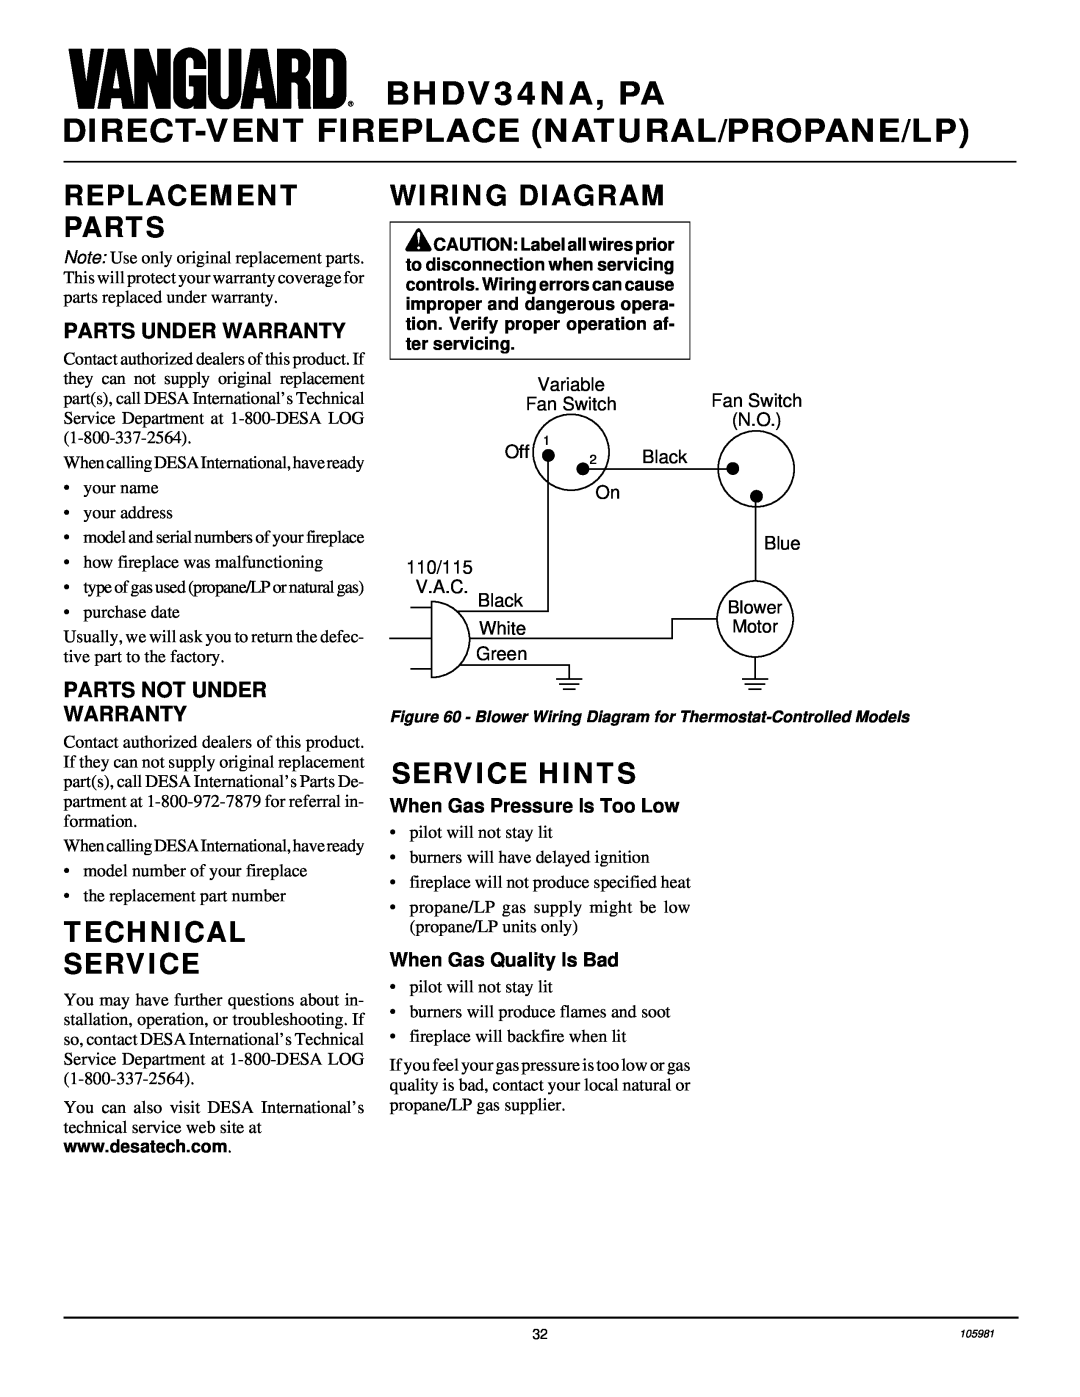 Desa BHDV34PA Replacement Parts, Wiring Diagram, Technical Service, Service Hints, Parts Under Warranty, BHDV34NA, PA 